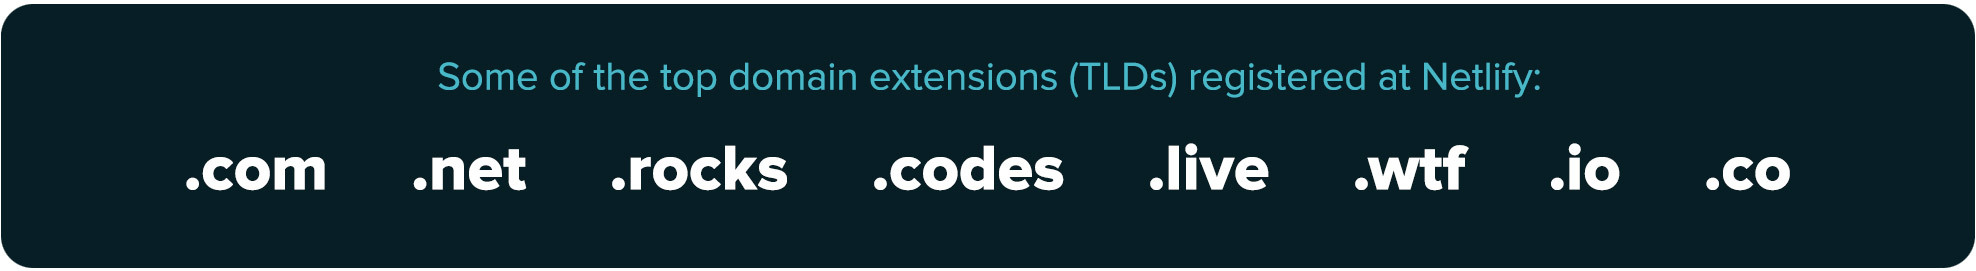 TLDs available to register on Netlify